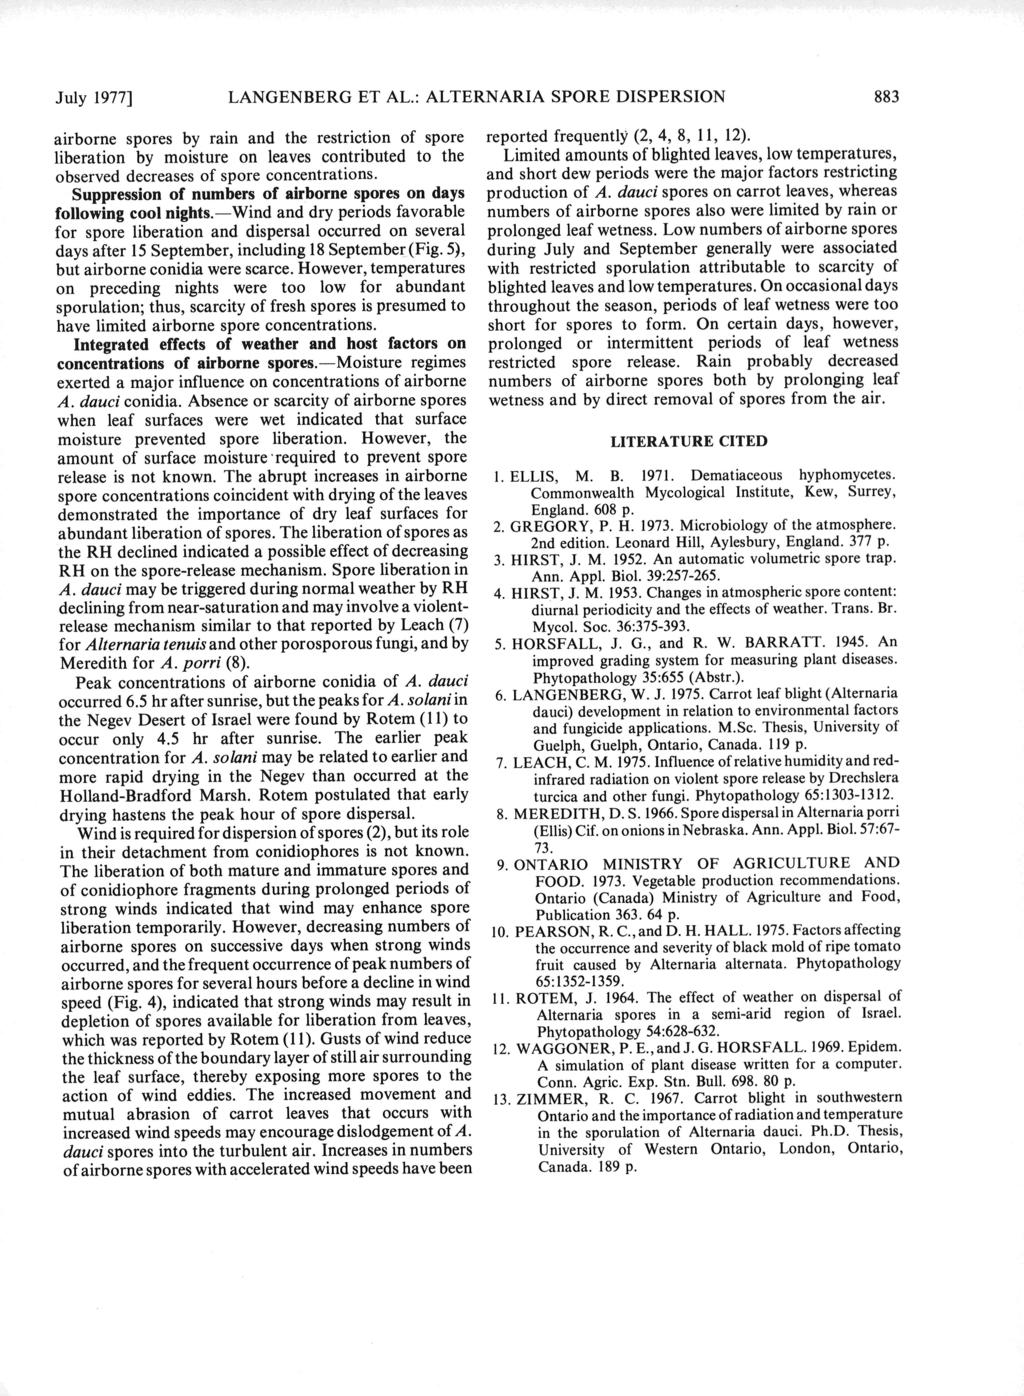 July 1977] LANGENBERG ET AL: ALTERNARIA SPORE DISPERSION 883 airborne spores by rain and restriction spore reported frequently (2, 4, 8, 11, 12) Limited amounts blighted leaves, low temperatures,